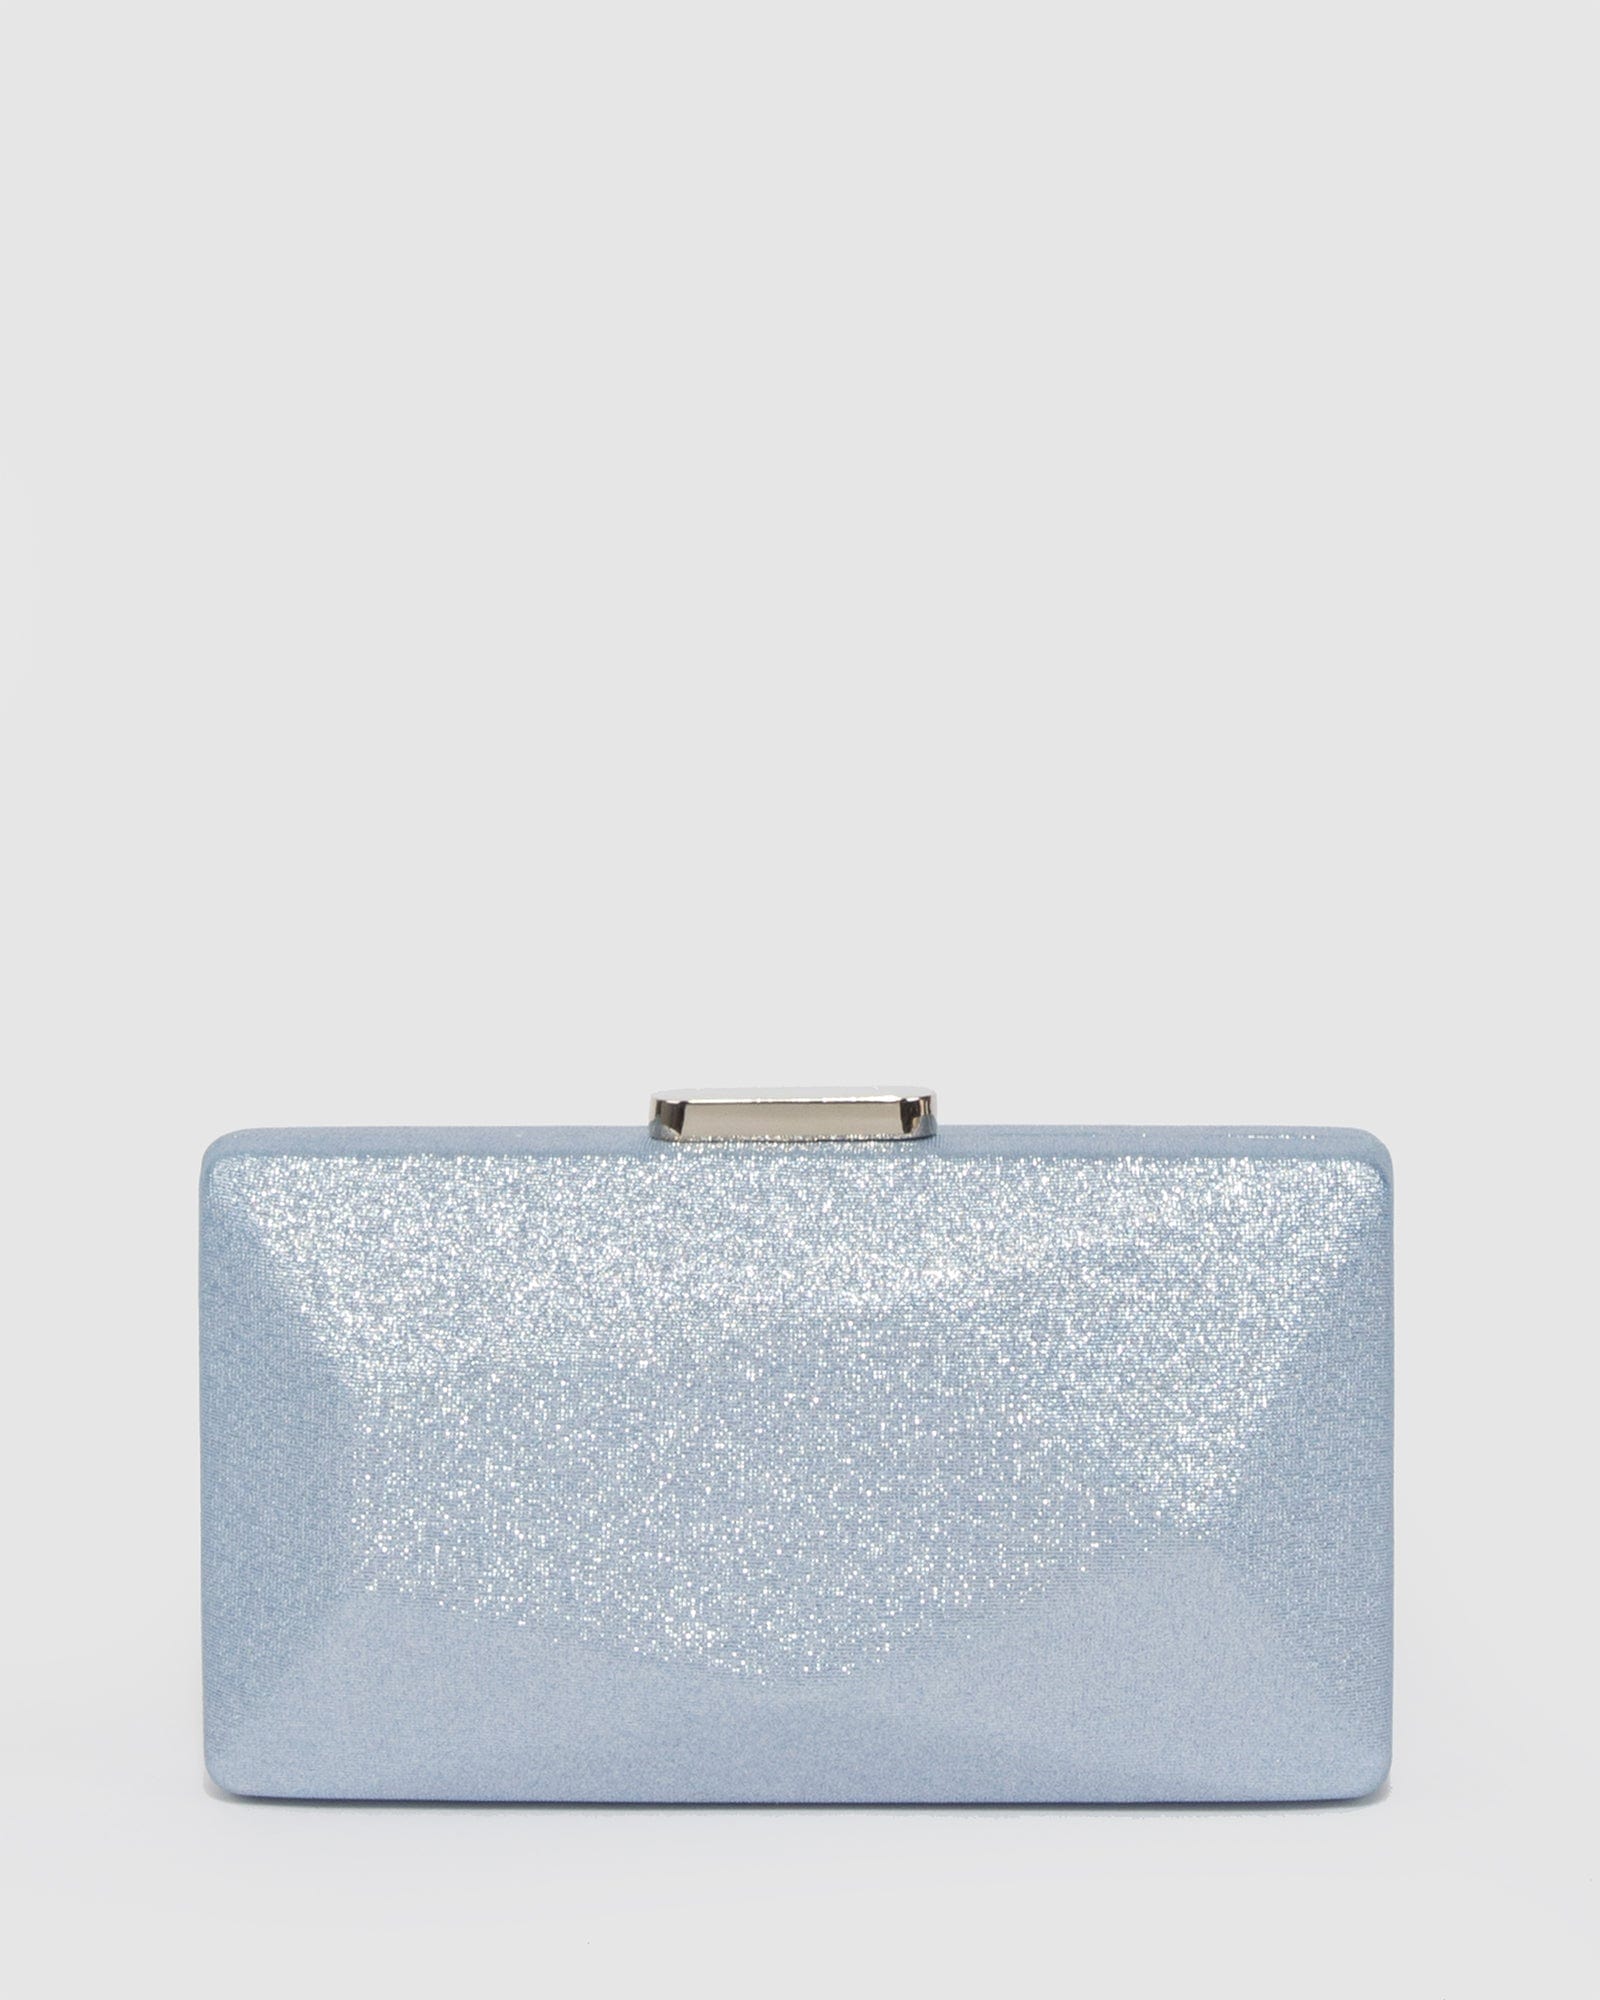 Lady Couture Beauty Embellished Hard Case Clutch Bag, Silver - Walmart.com